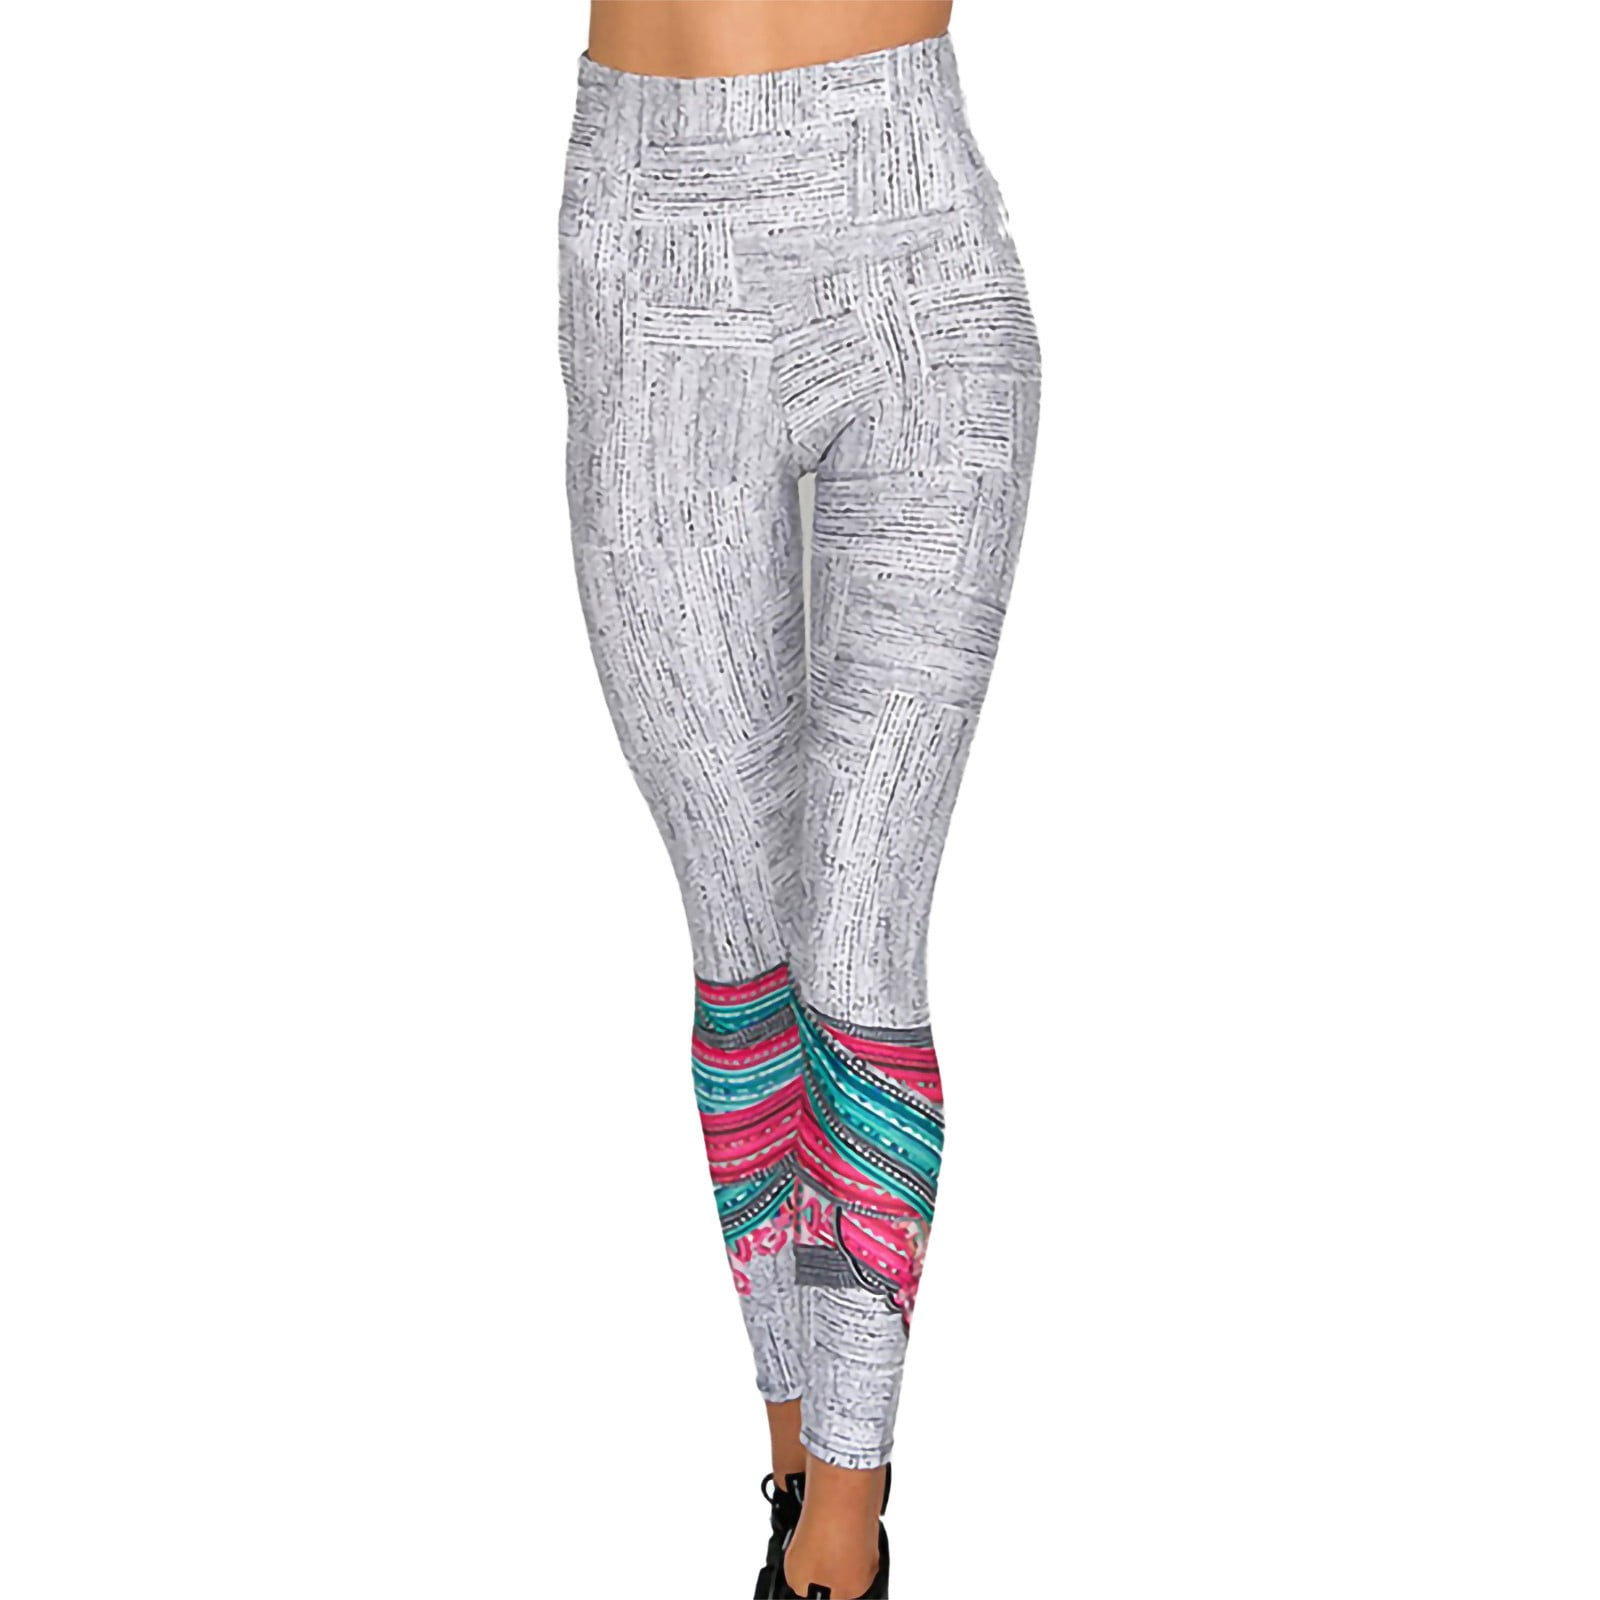 Details about   Women High Waist Ruched Leggings Yoga Pants Print Fitness Sports Running Workout 